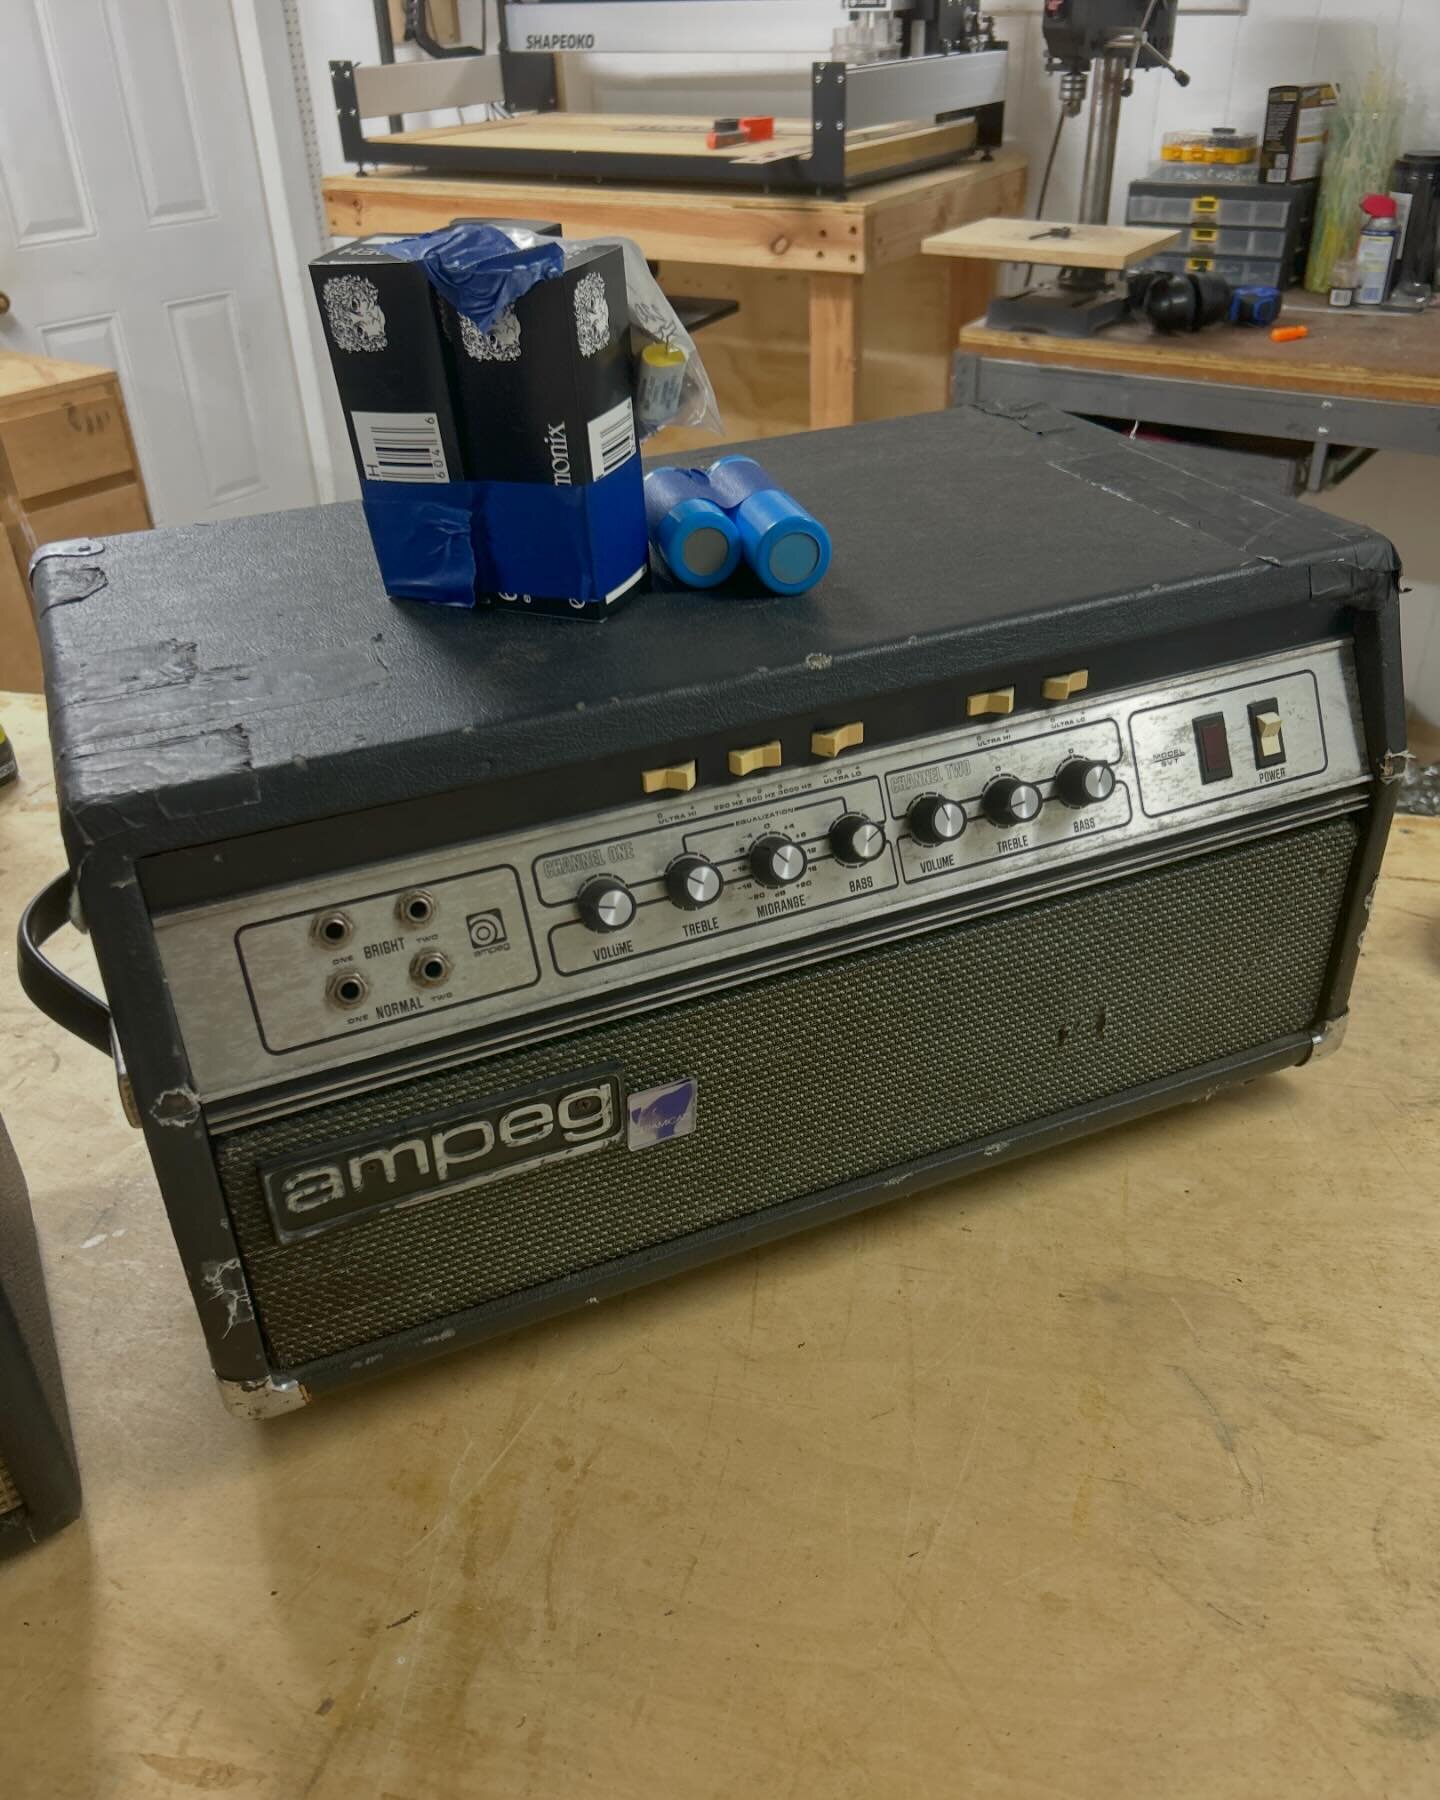 Spent the day diving into the world of vintage amps! Worked on a '70s Ampeg SVT, addressing bad 6550s &amp; 12ax7, replacing plate resistors, and upgrading power filter caps. Delved into a Blackface Fender Deluxe, fixing its Octocoupler. Resurrected 